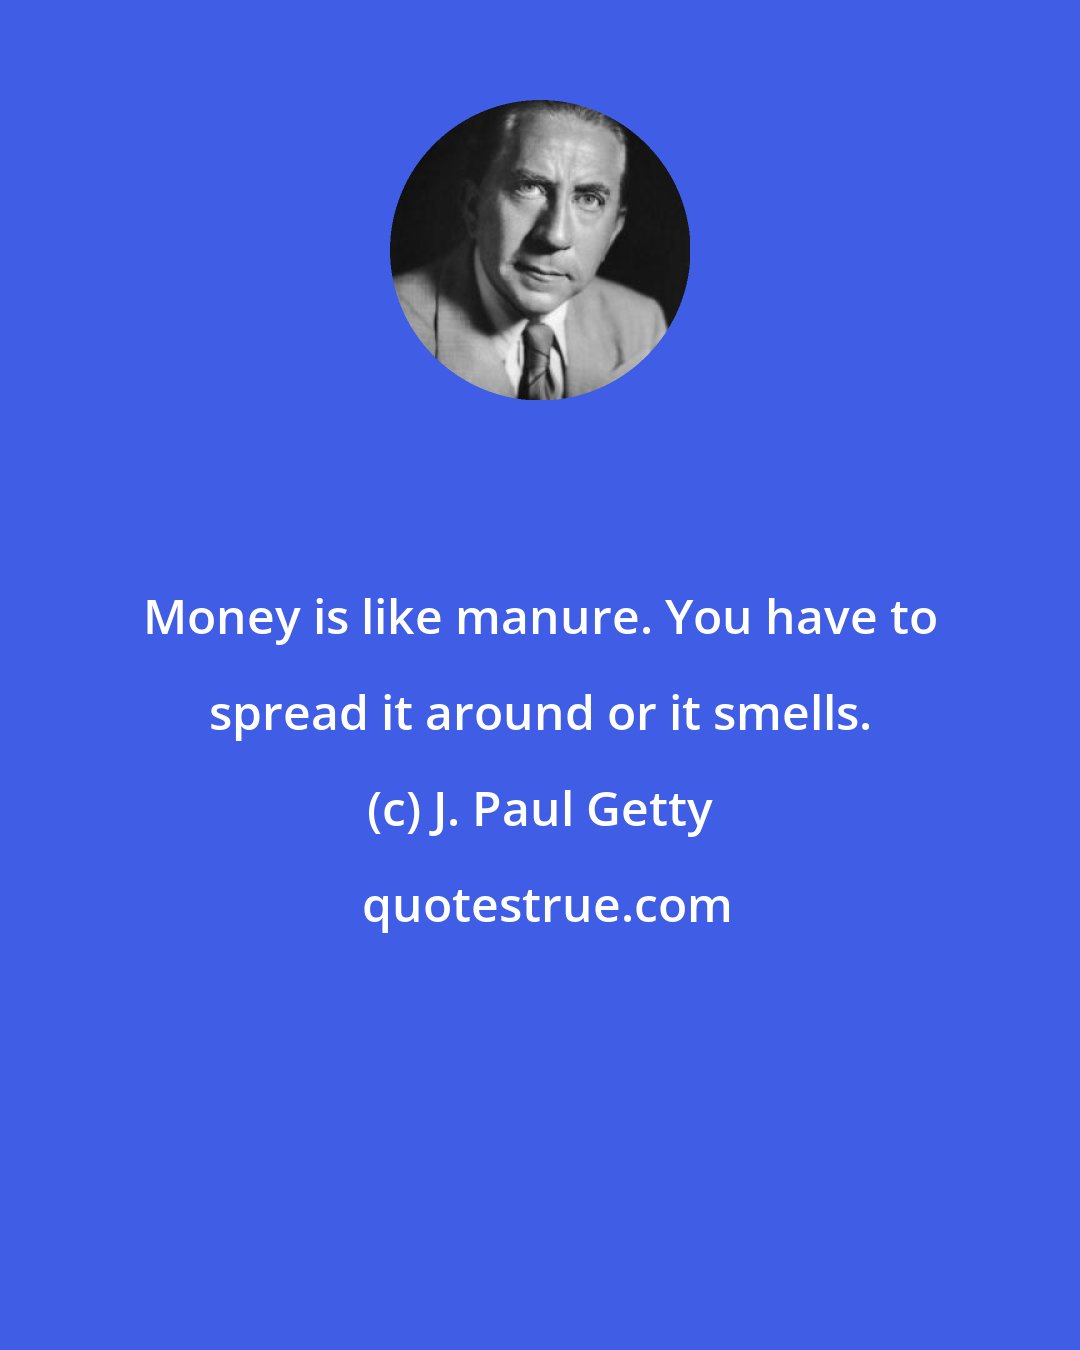 J. Paul Getty: Money is like manure. You have to spread it around or it smells.